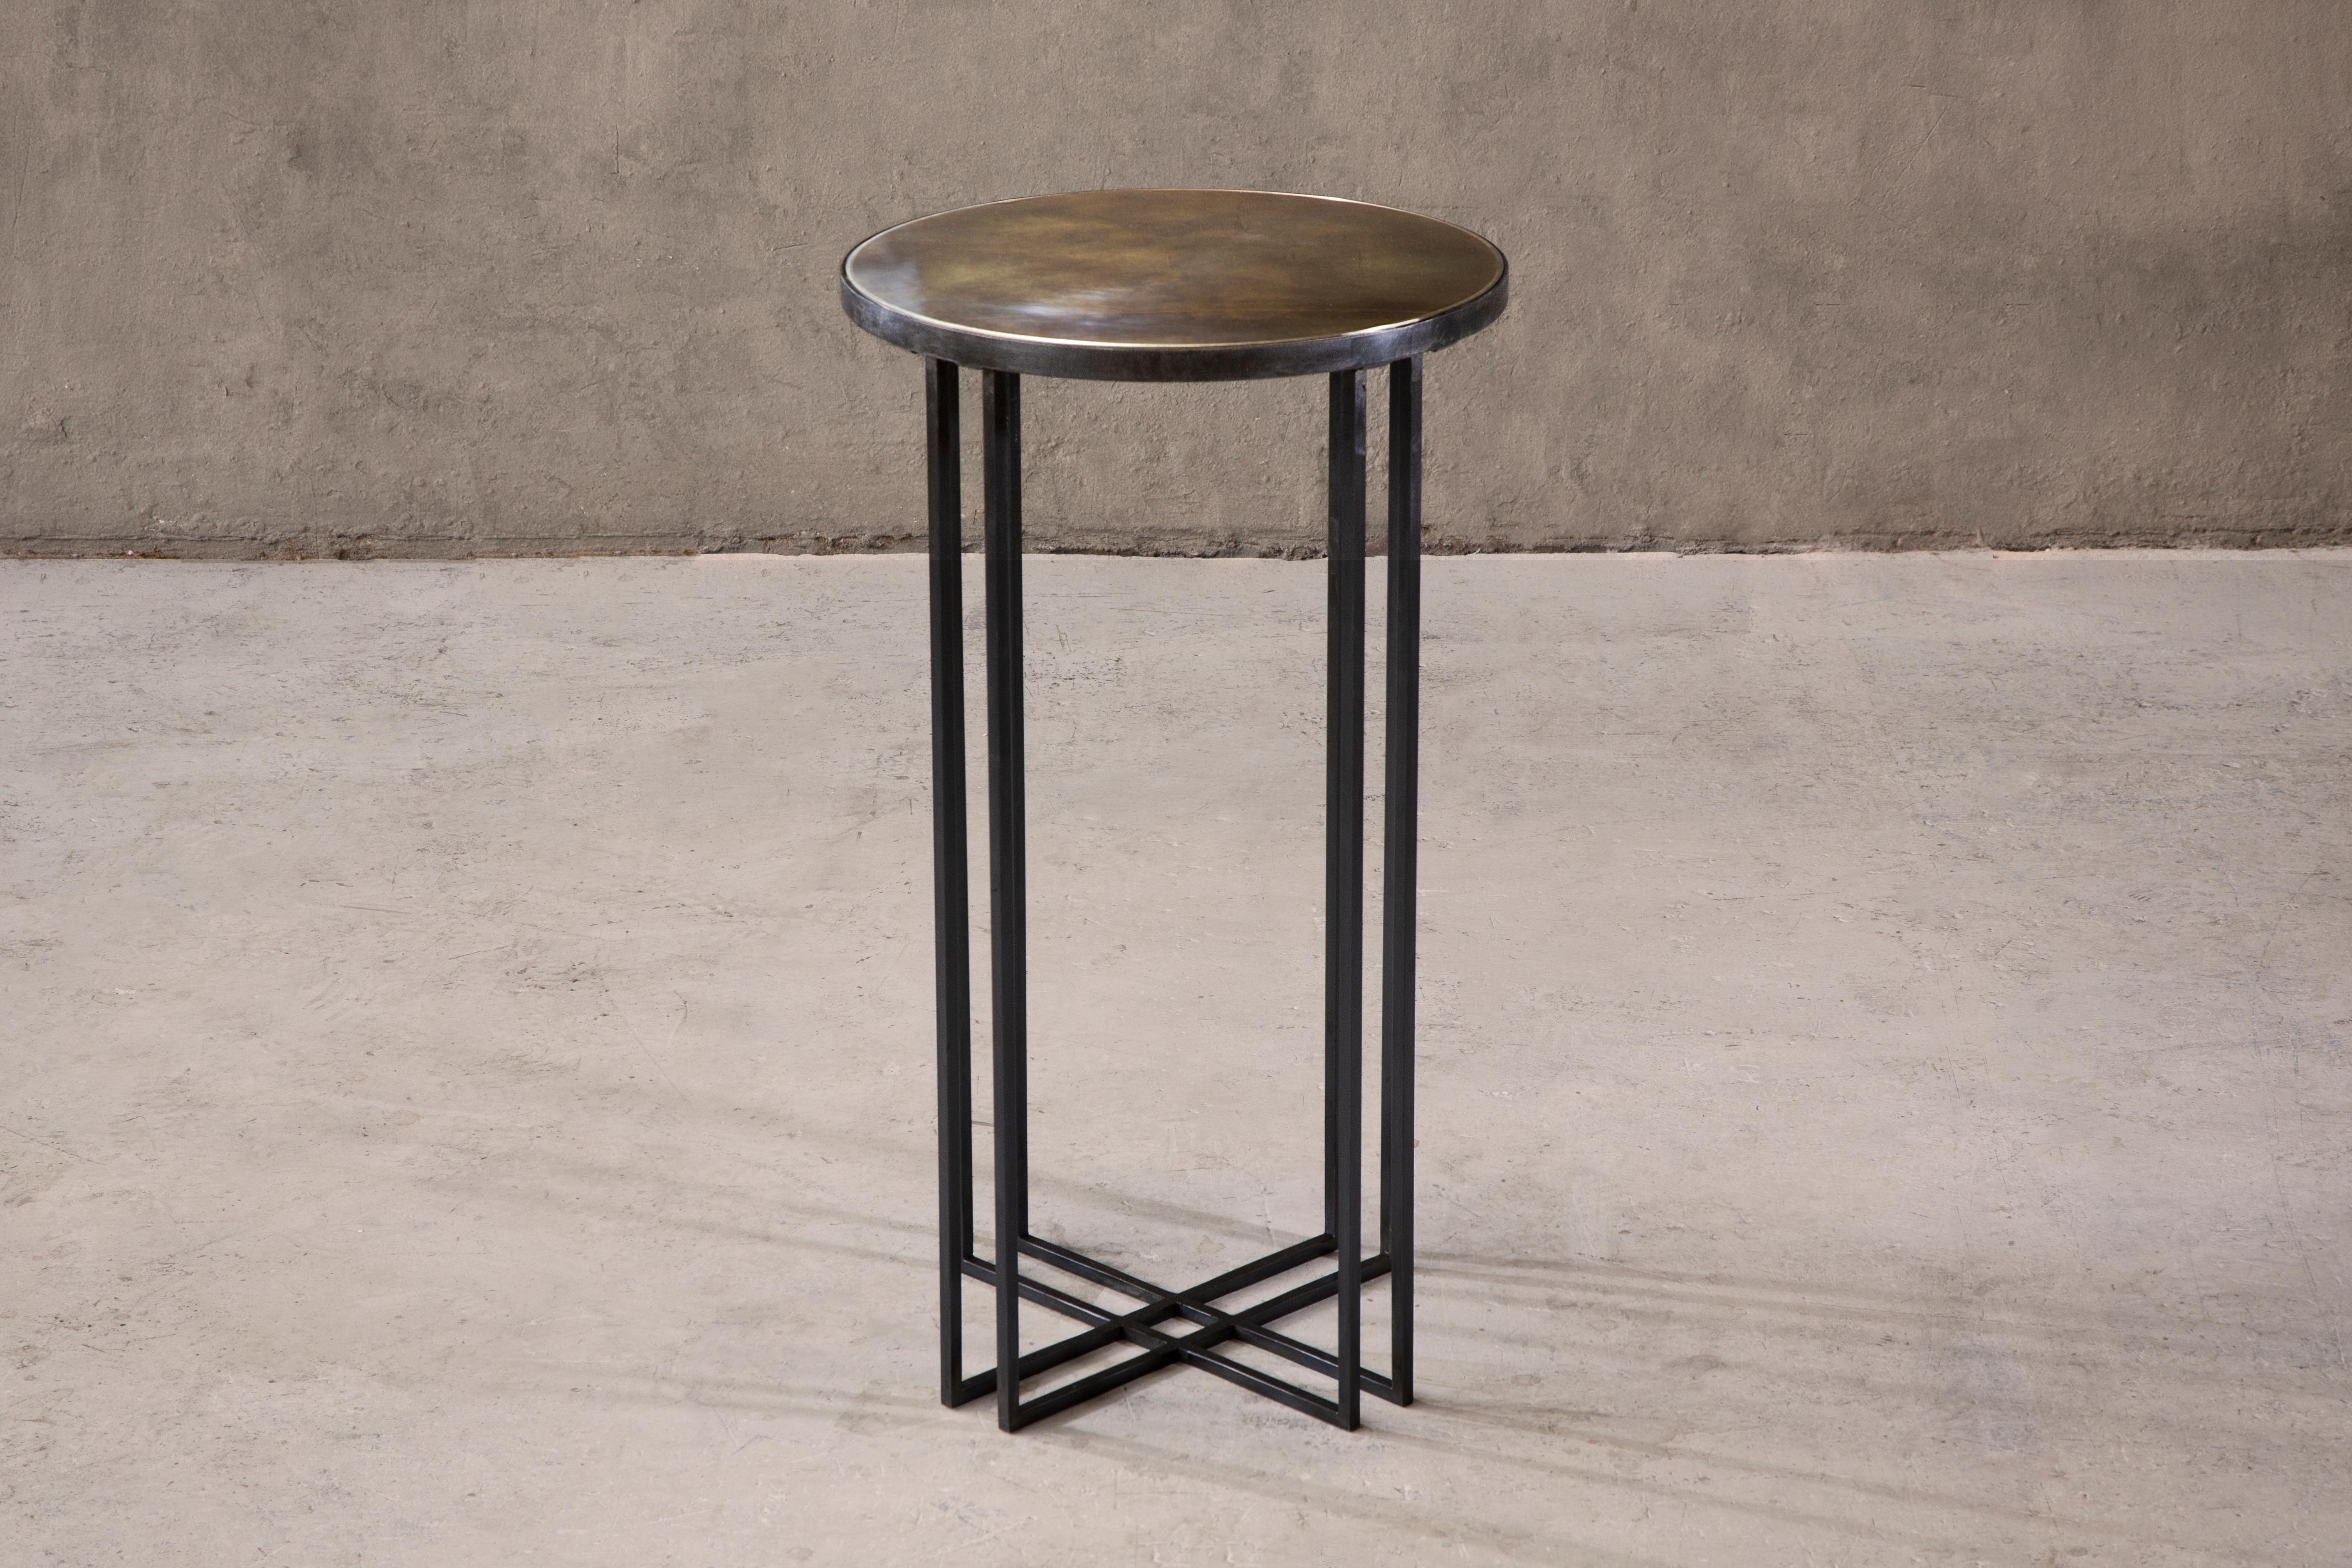 Side table in blackened steel, patinated brass with a brushed brass trim. Handcrafted in North East, England.

Measures: 40cm (diameter) x 90cm (height). 
Custom sizes available.

Made to order in 12 weeks.
Price excludes VAT.